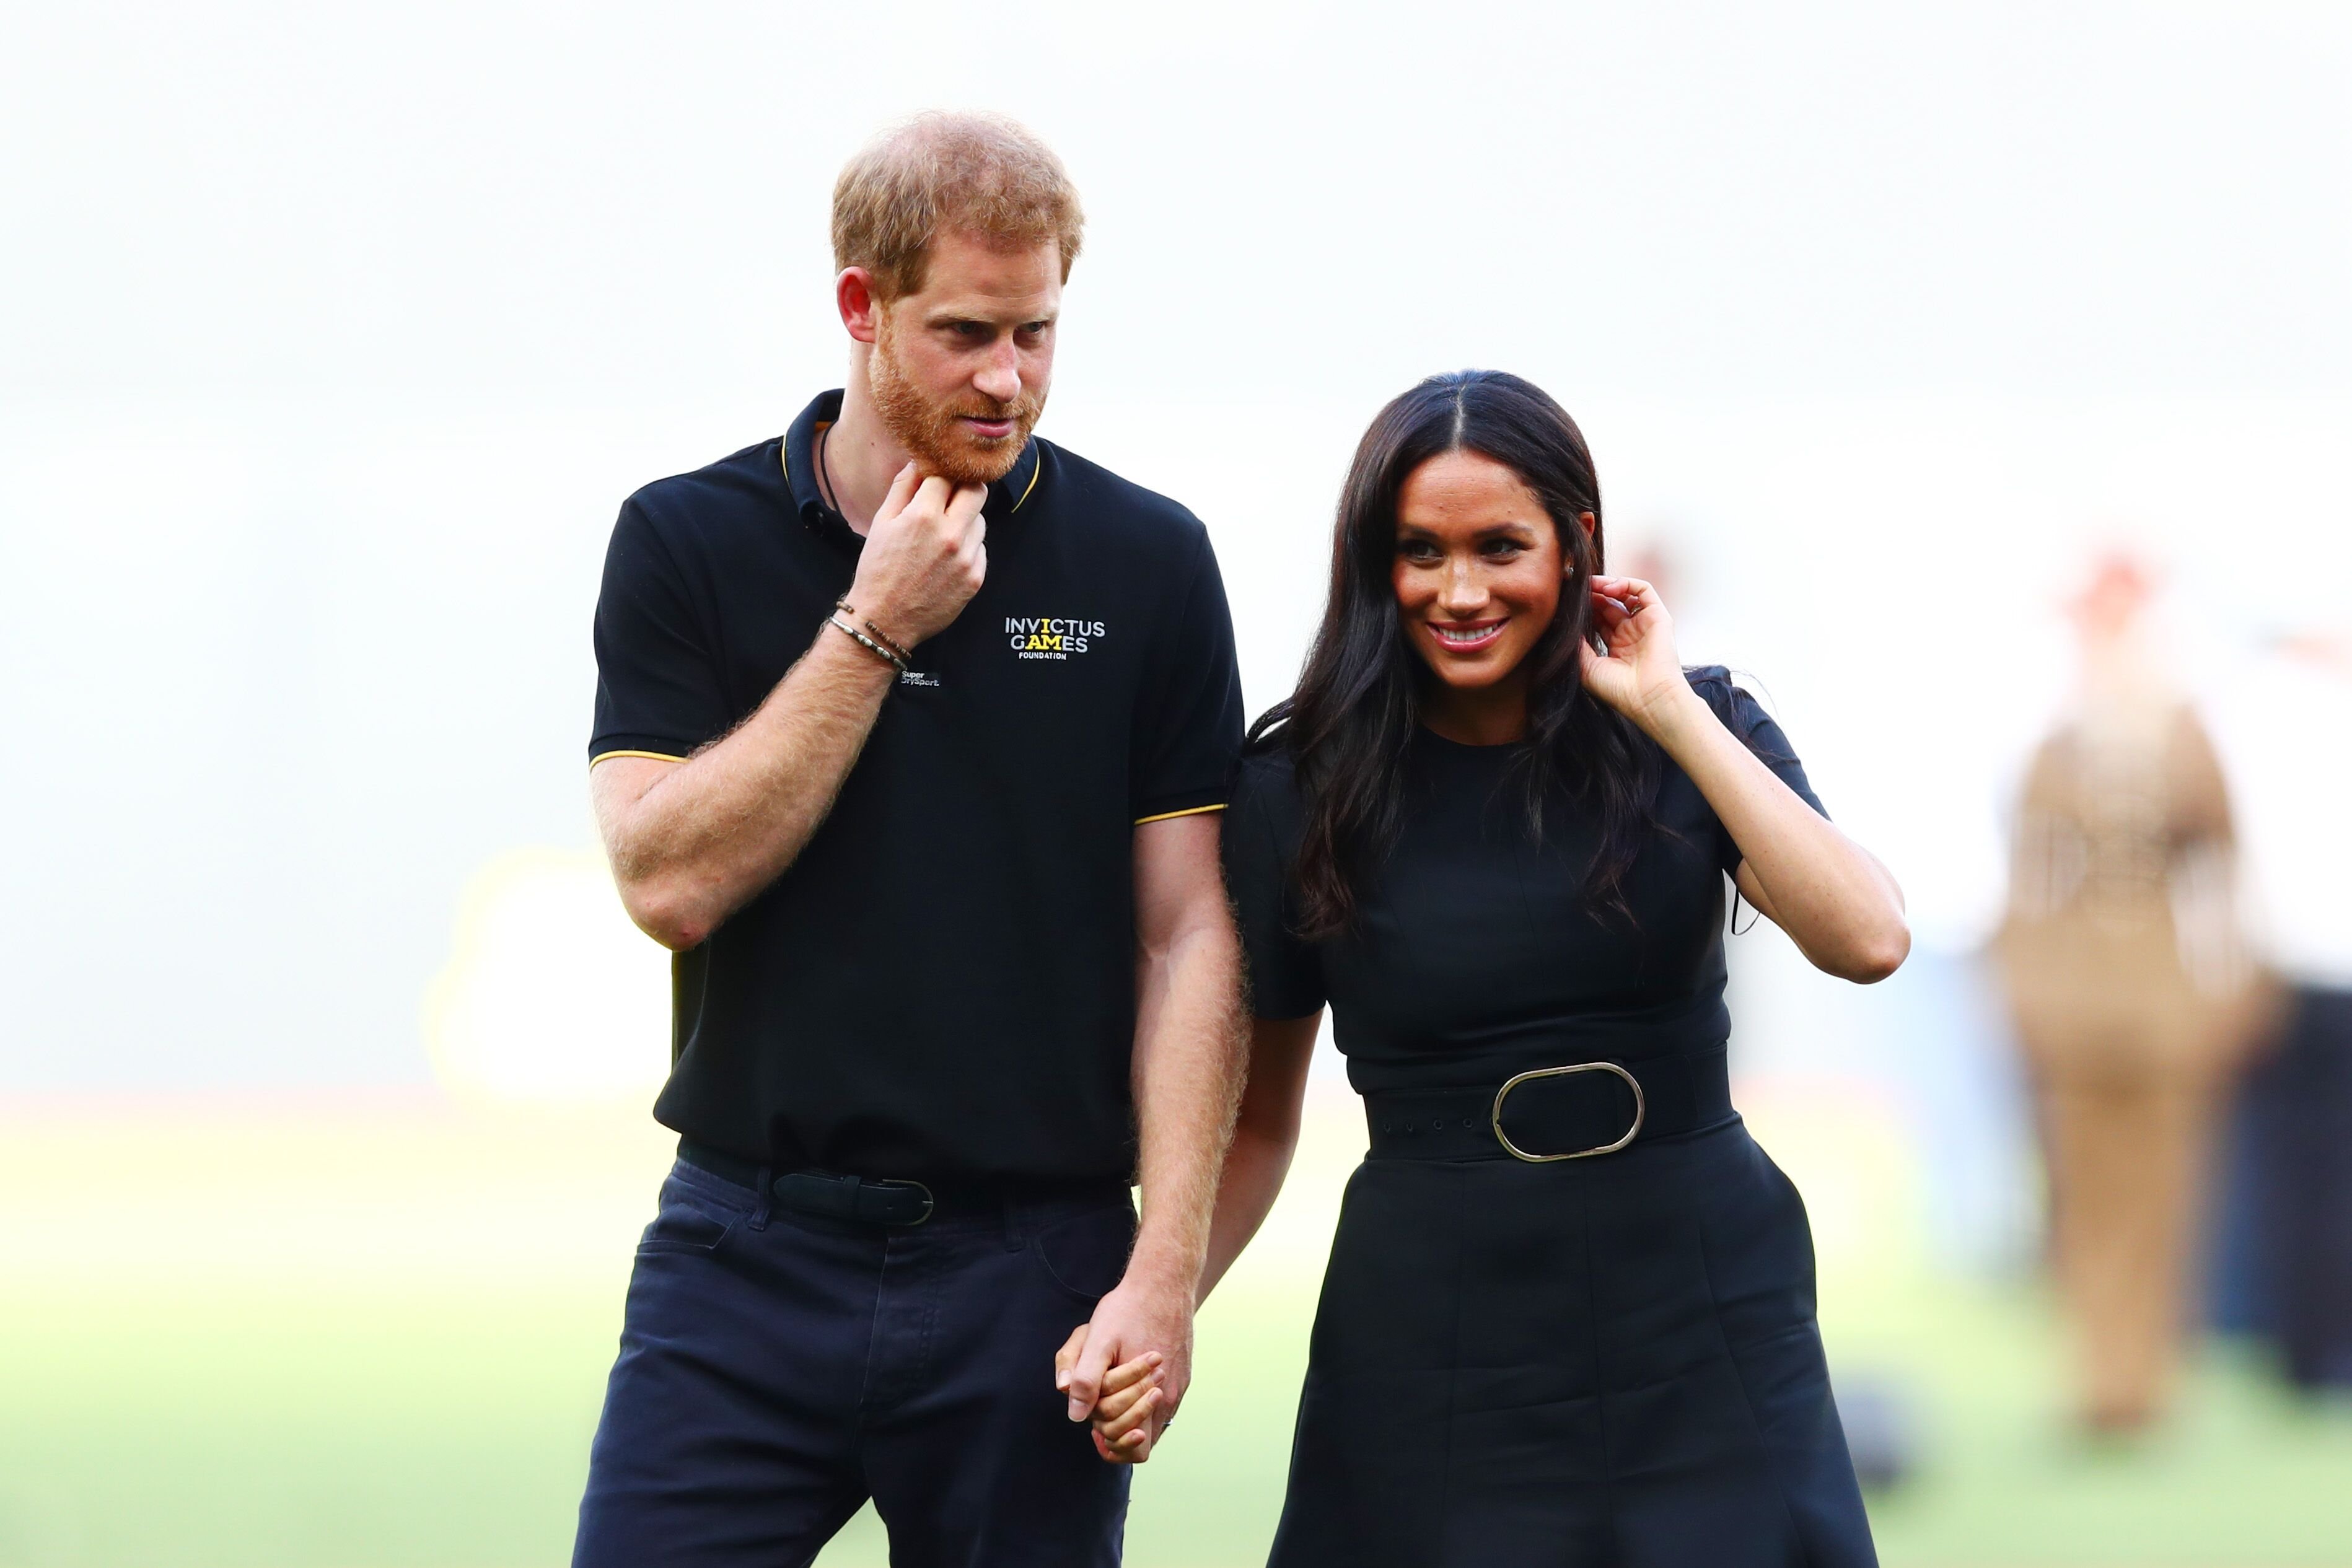 Prince Harry, Duke of Sussex and Meghan, Duchess of Sussex look on during the pre-game ceremonies before the MLB London Series game between Boston Red Sox and New York Yankees at London Stadium on June 29, 2019 | Photo: Getty Images